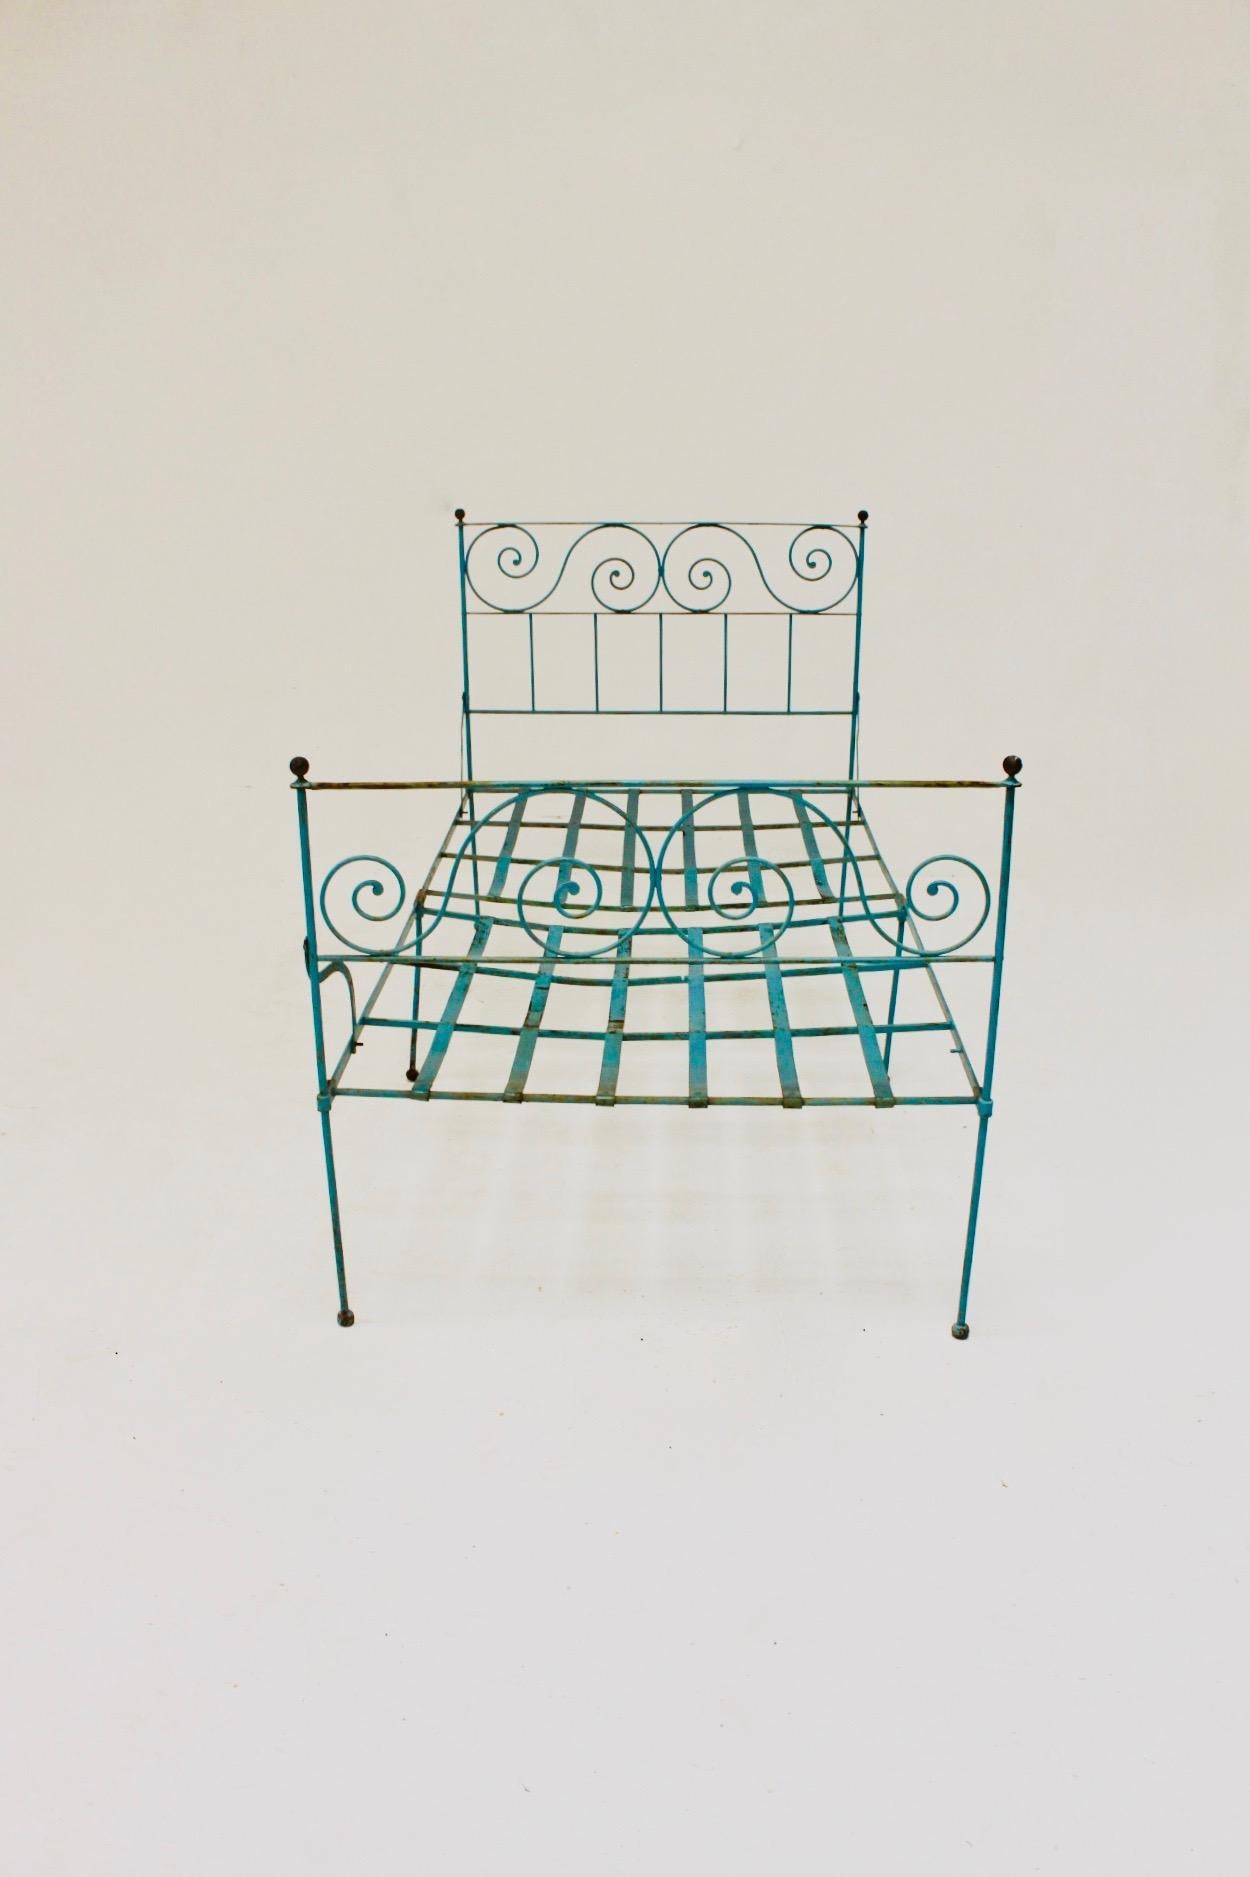 Adorable old blue iron folding bed, Spain, 19th century.

*One of the fixings, iron anchor, has been lost, marked with my finger in the photographs.
It is not affects the structural of the bed or the stability. Anyway, this lost piece can be